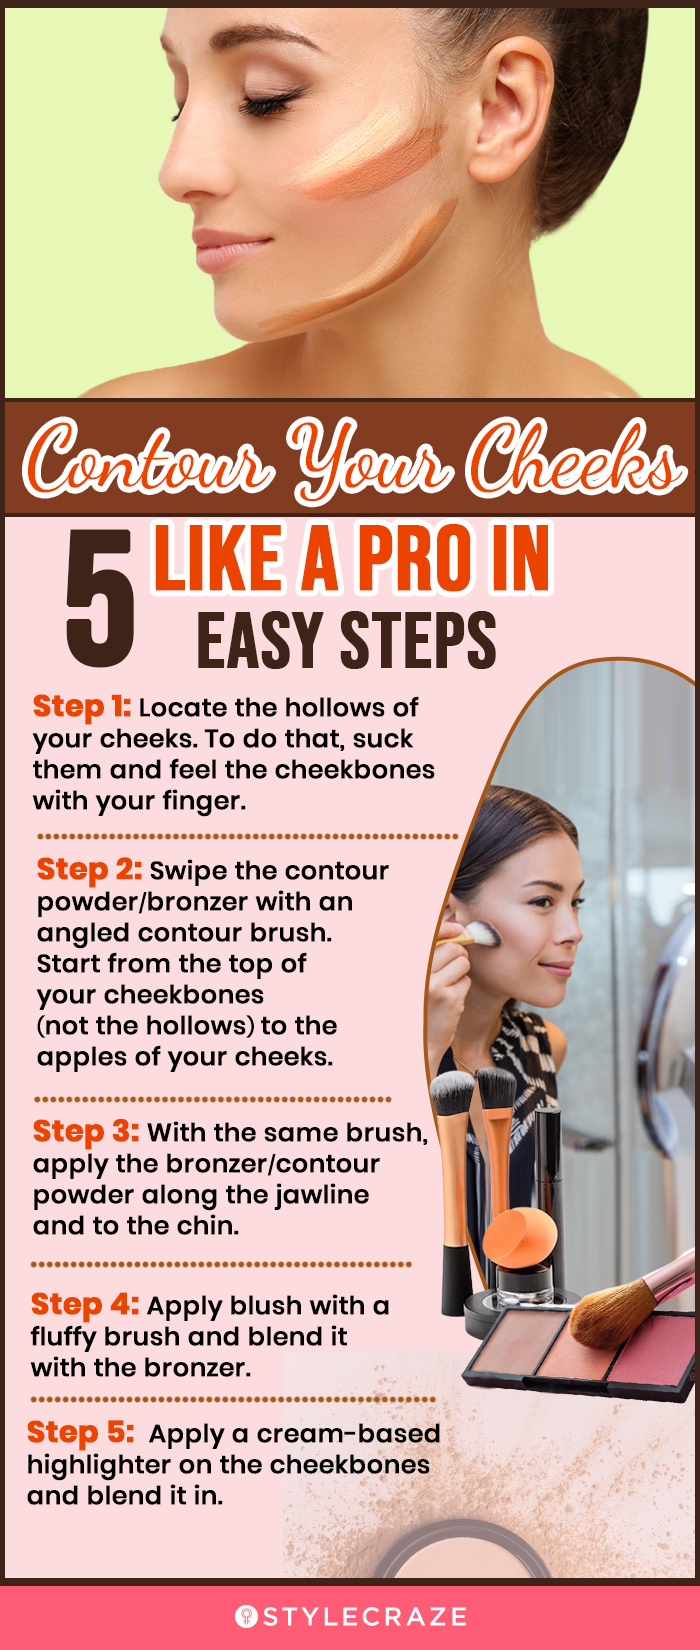 Cheekbone Contouring: How To Contour Your Cheekbones Perfectly?